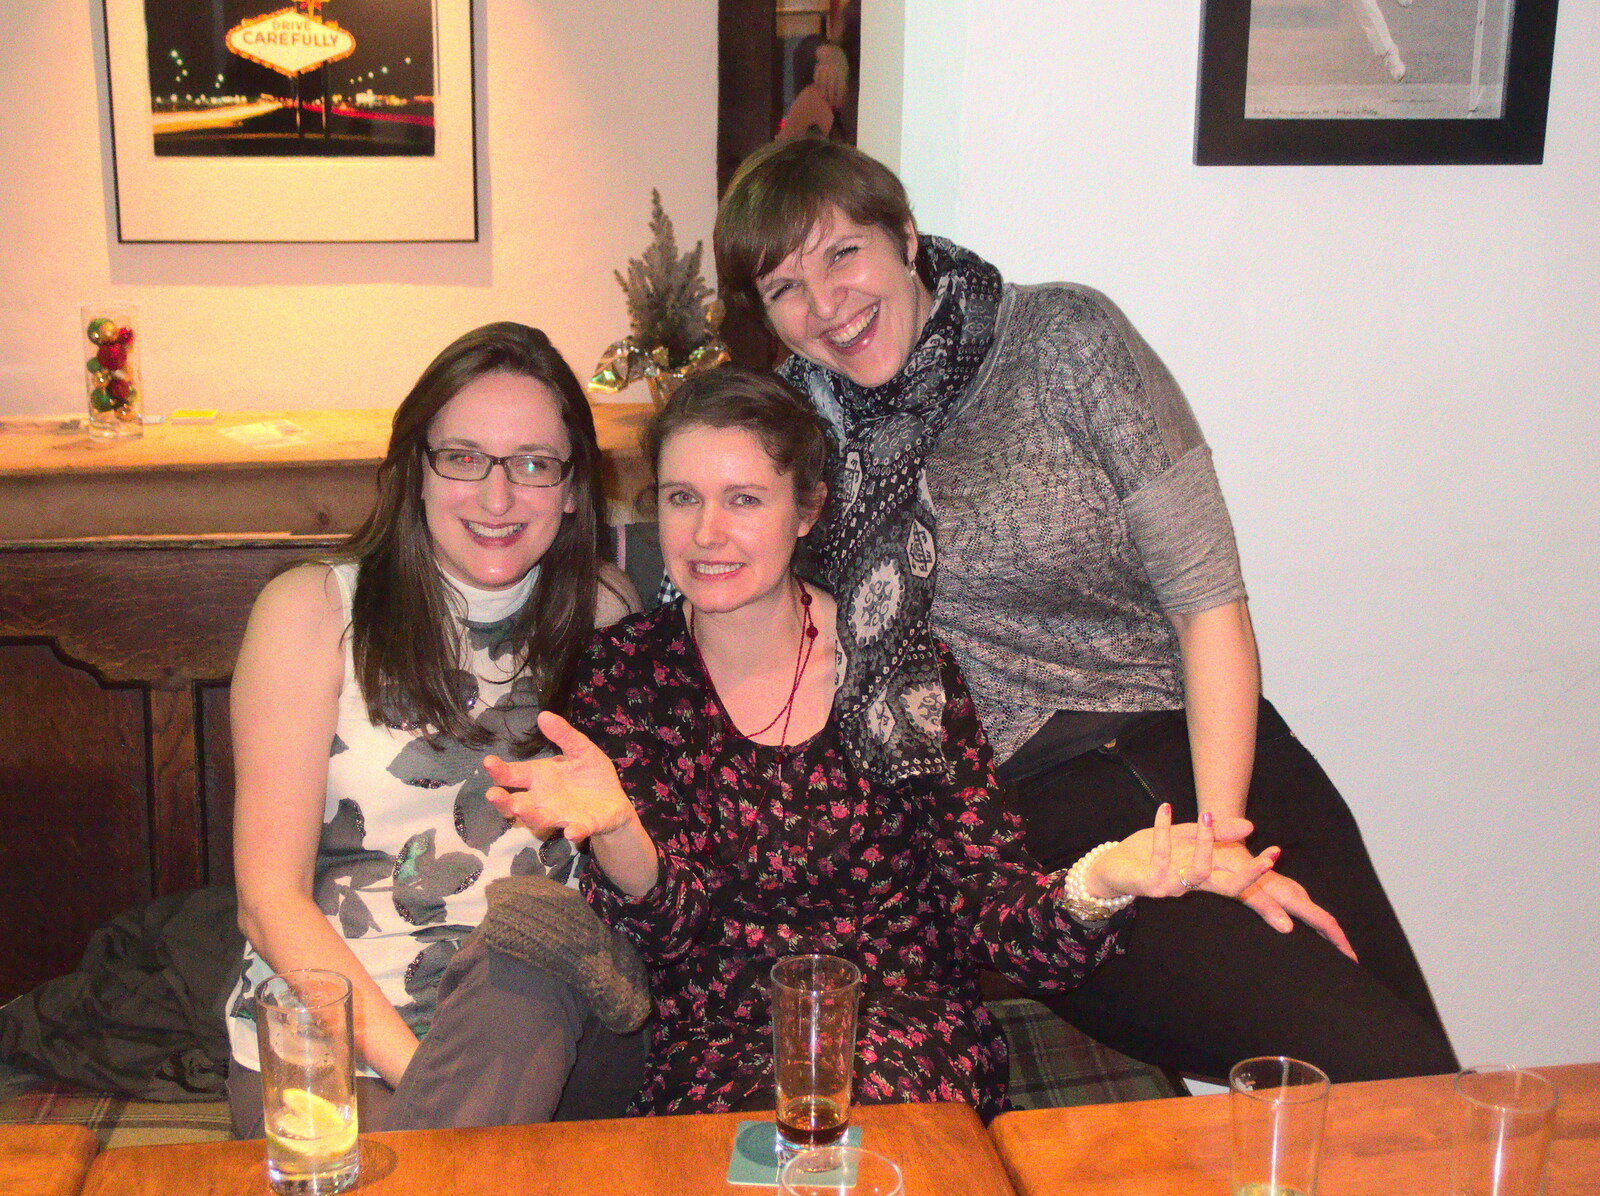 Suey, Isobel and Sarah from New Year's Eve at the Oaksmere, Brome, Suffolk - 31st December 2014